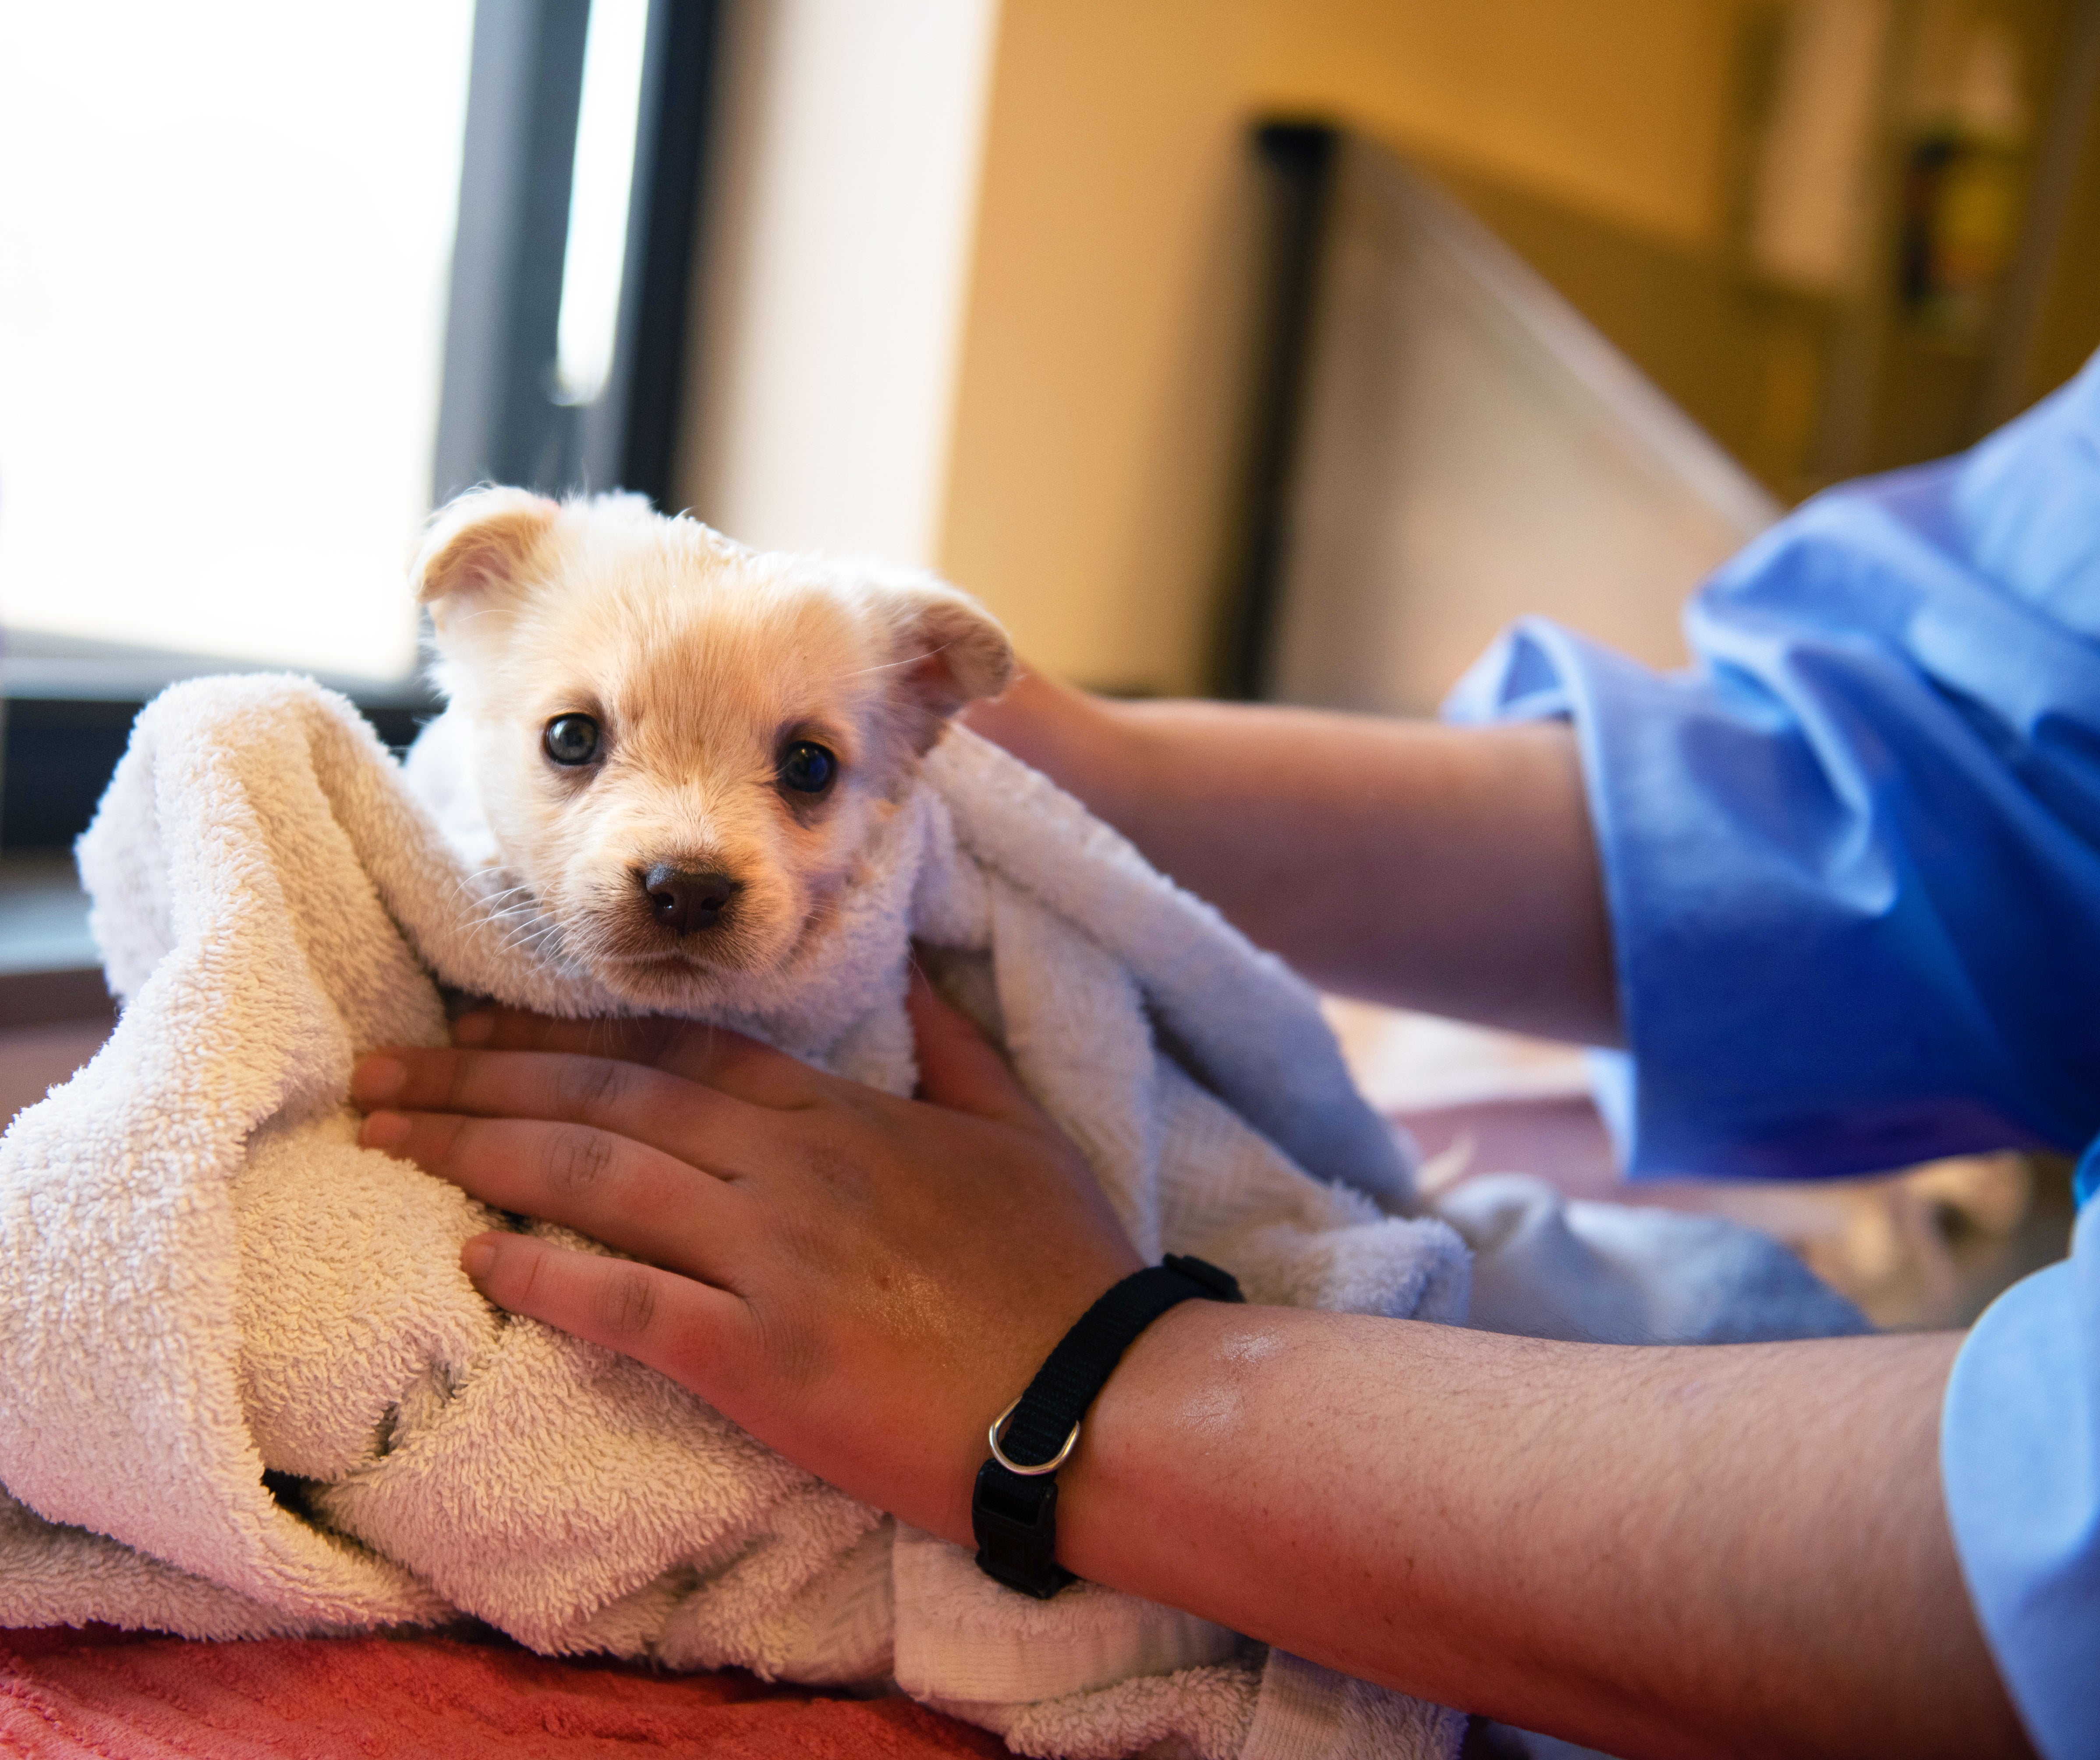 Tiny puppy relaxing in a warm towel after a bath